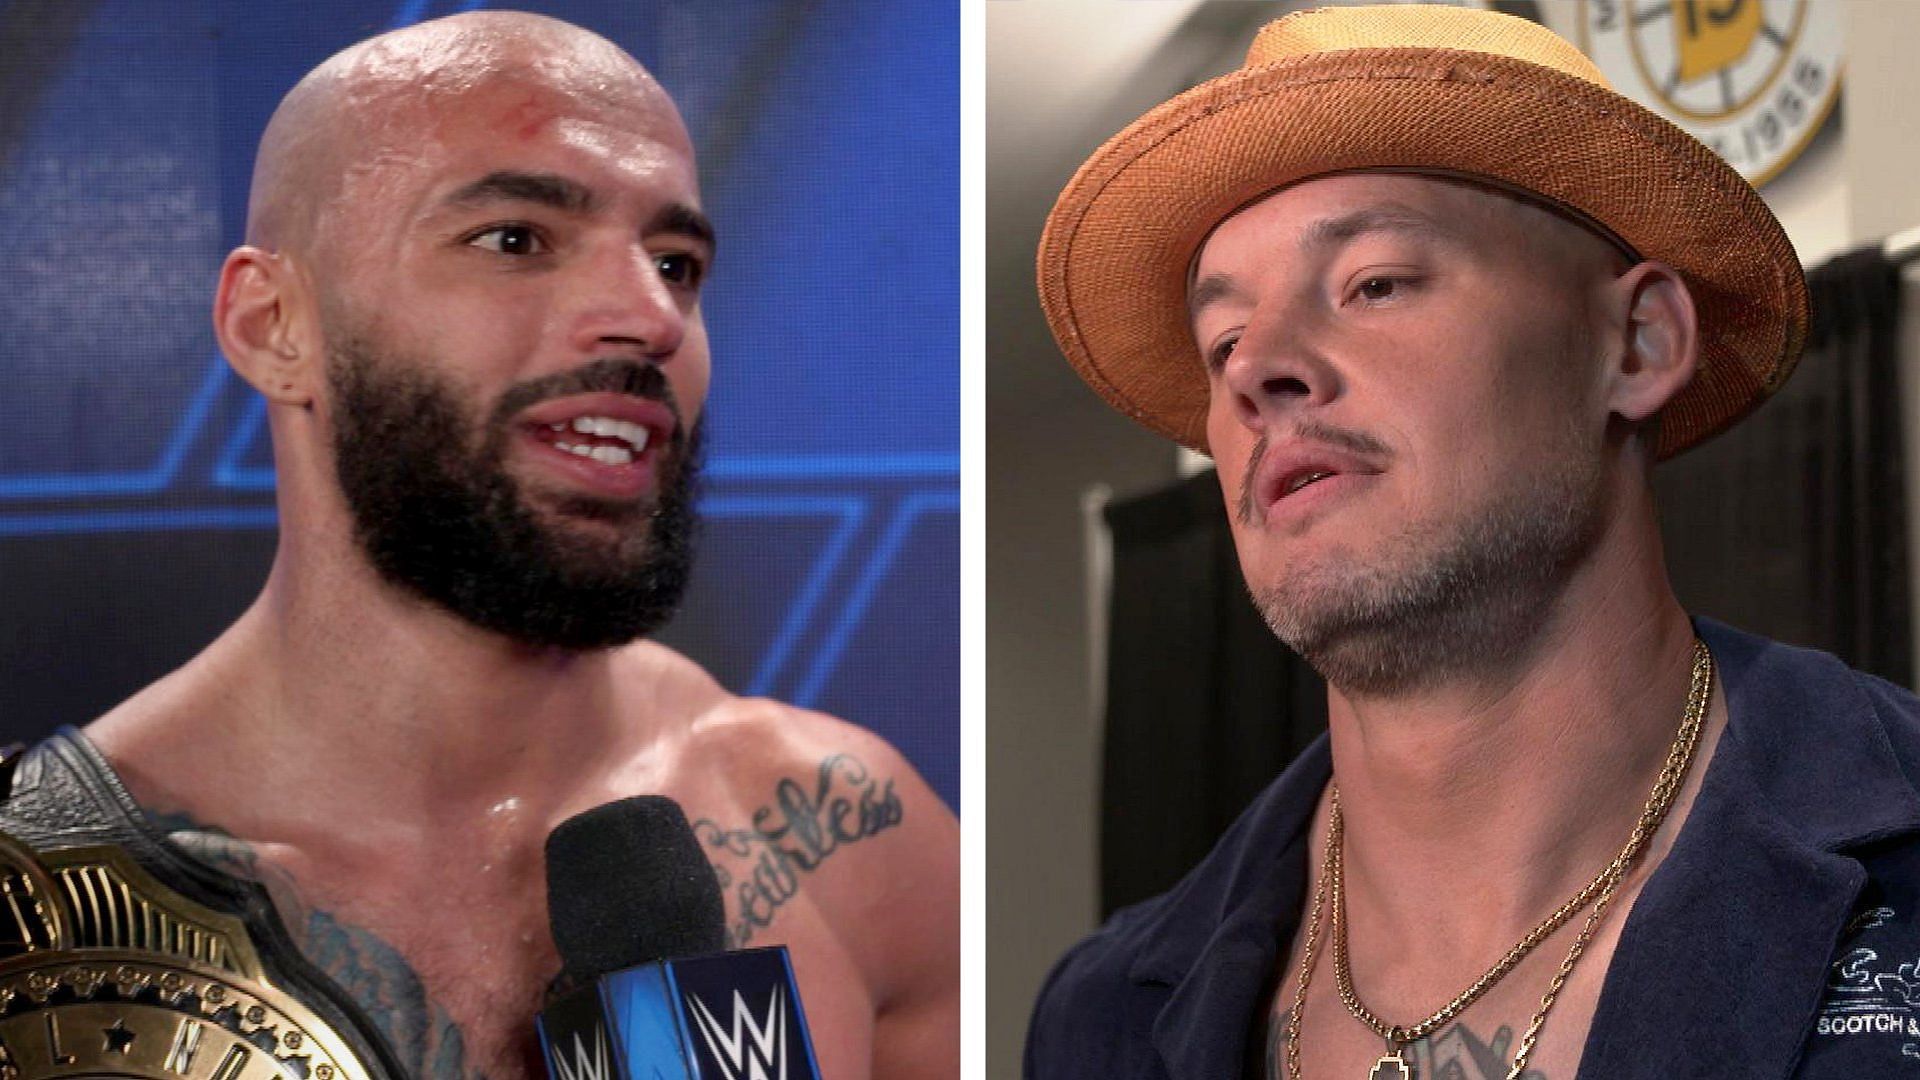 Ricochet and Happy Corbin are set to battle on WWE SmackDown